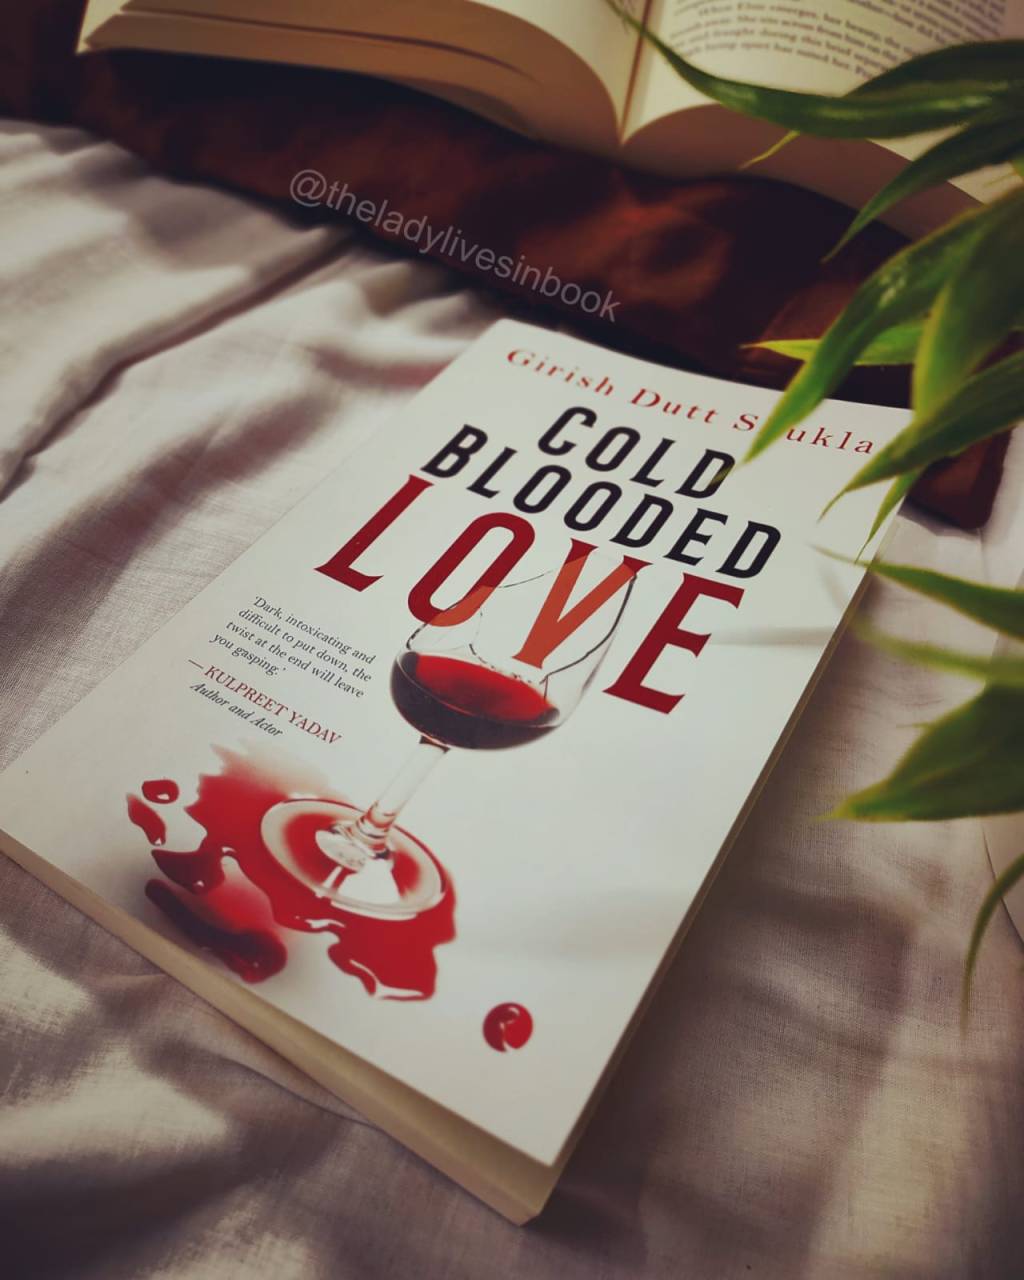 If you liked The Silent Patient then you will like it too: Cold Blooded Love by Girish Dutt Shukla- Book Review